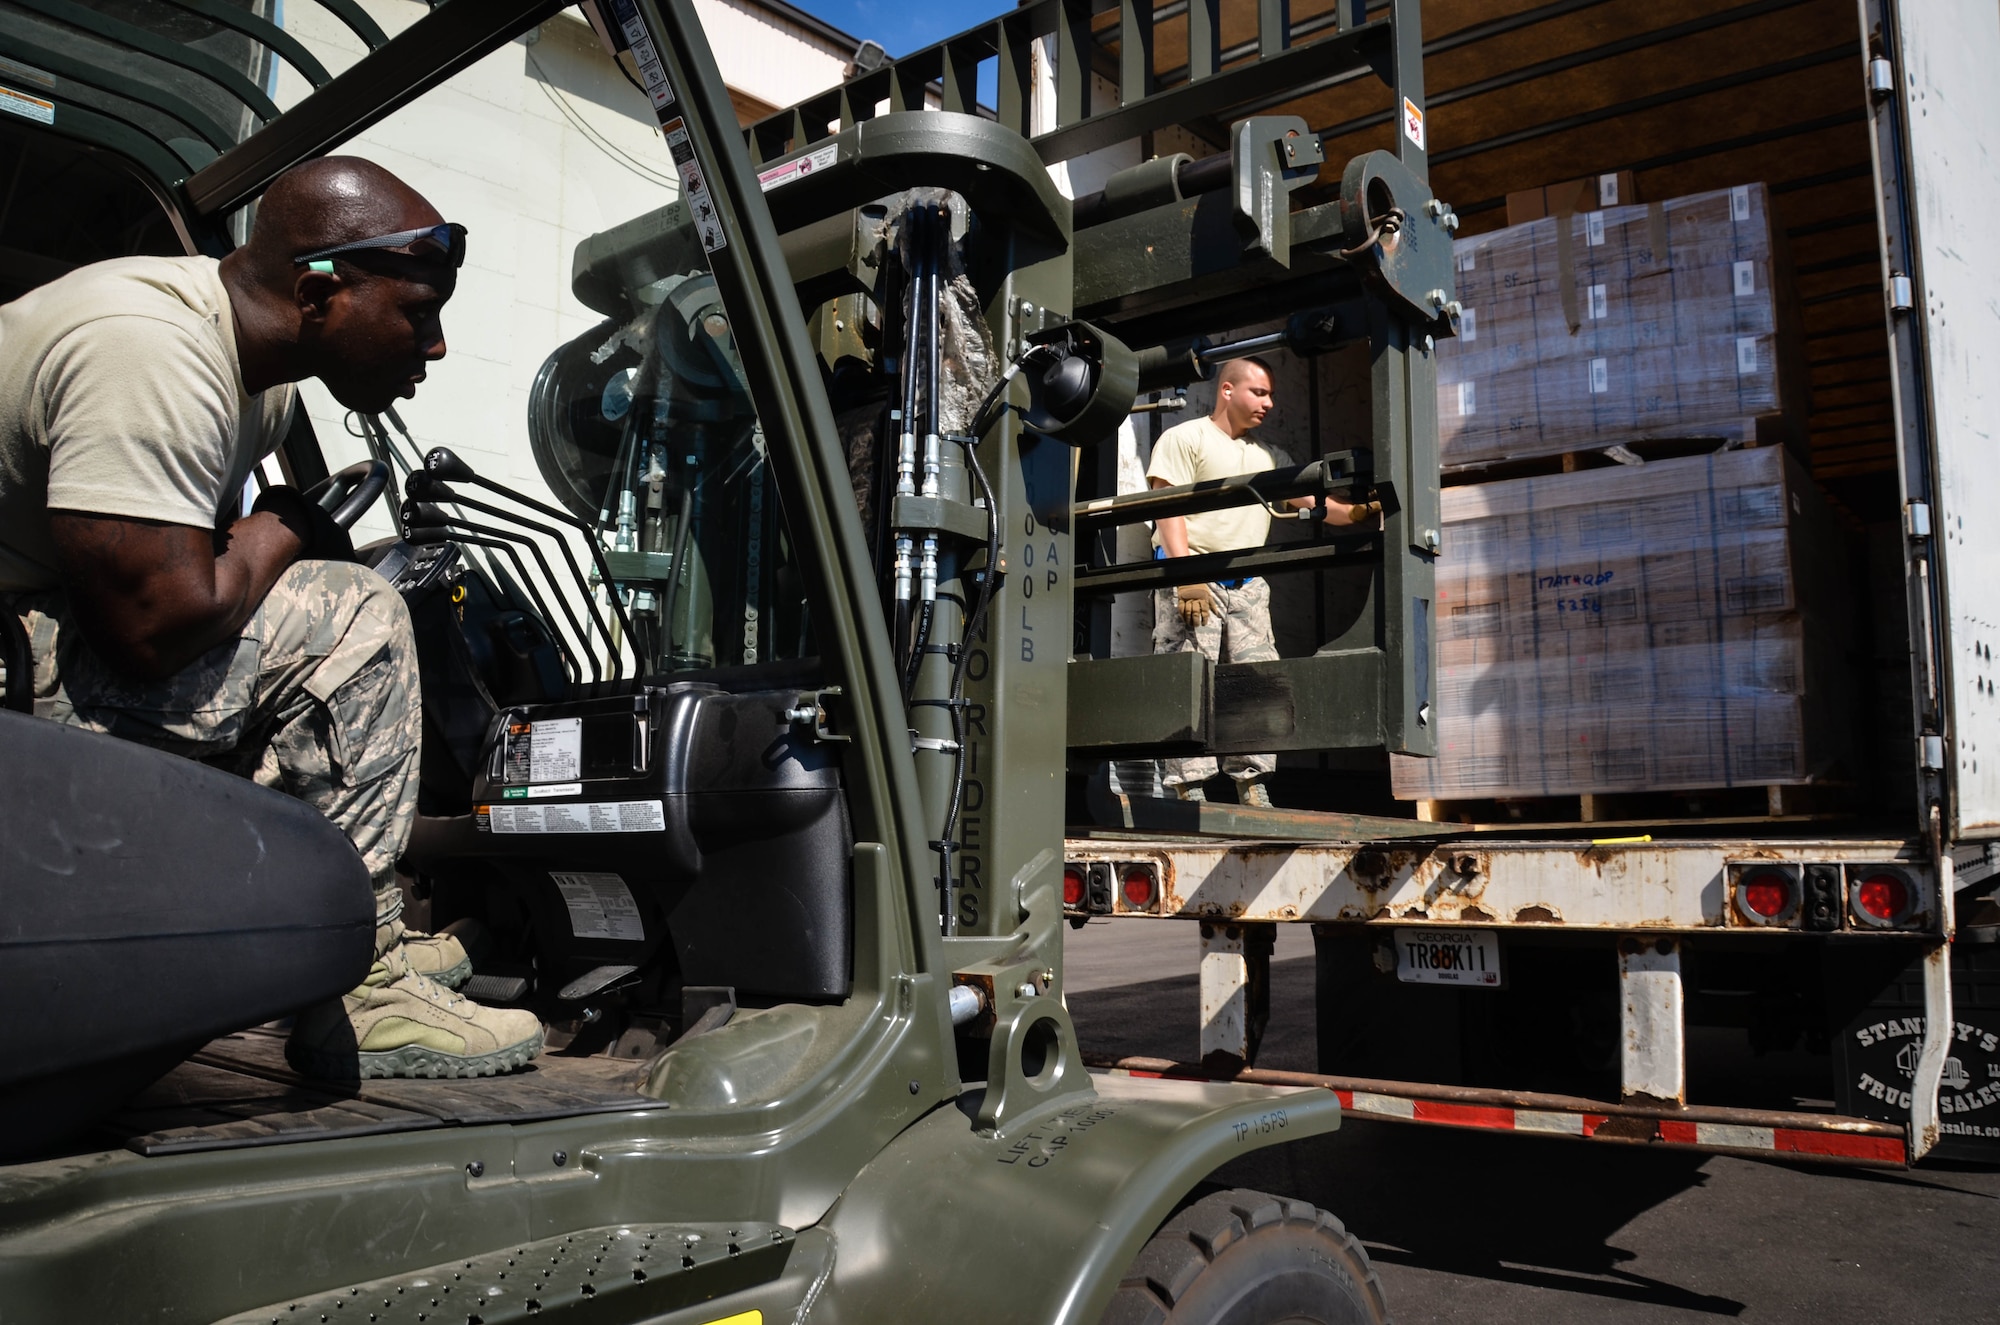 Staff Sgt. Kens Germain, an aerial porter from Joint Base McGuire-Dix-Lakehurst, New Jersey, positions a forklift to pick up a stack of ready-to-eat meals at Dobbins Air Reserve Base, Ga., Oct. 4. A total of 23,390 pounds of food and water will be transported to Puerto Rico and distributed to those in need. (U.S. Air Force photo by Tech. Sgt. Kelly Goonan)